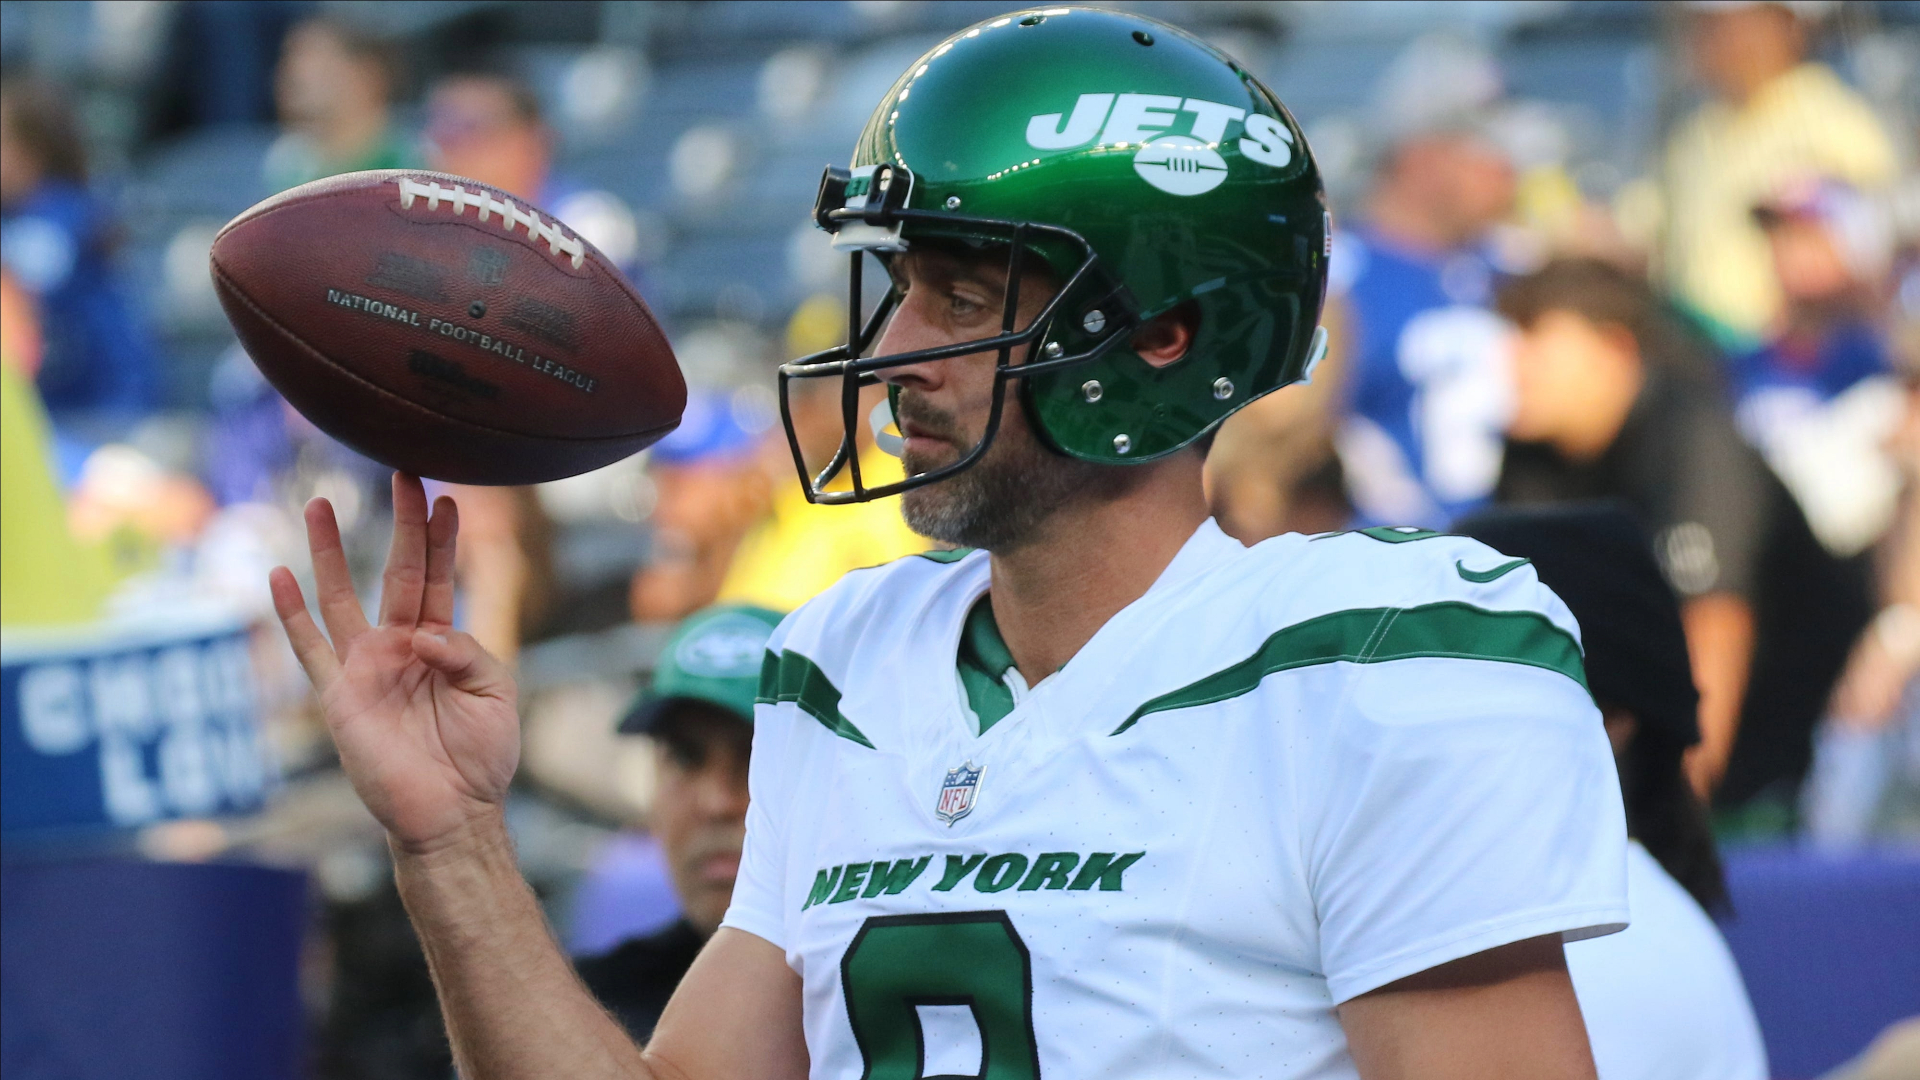 Ex-NFL QB Shuts Down Speculation Of Jets Pitch After Aaron Rodgers
Injury